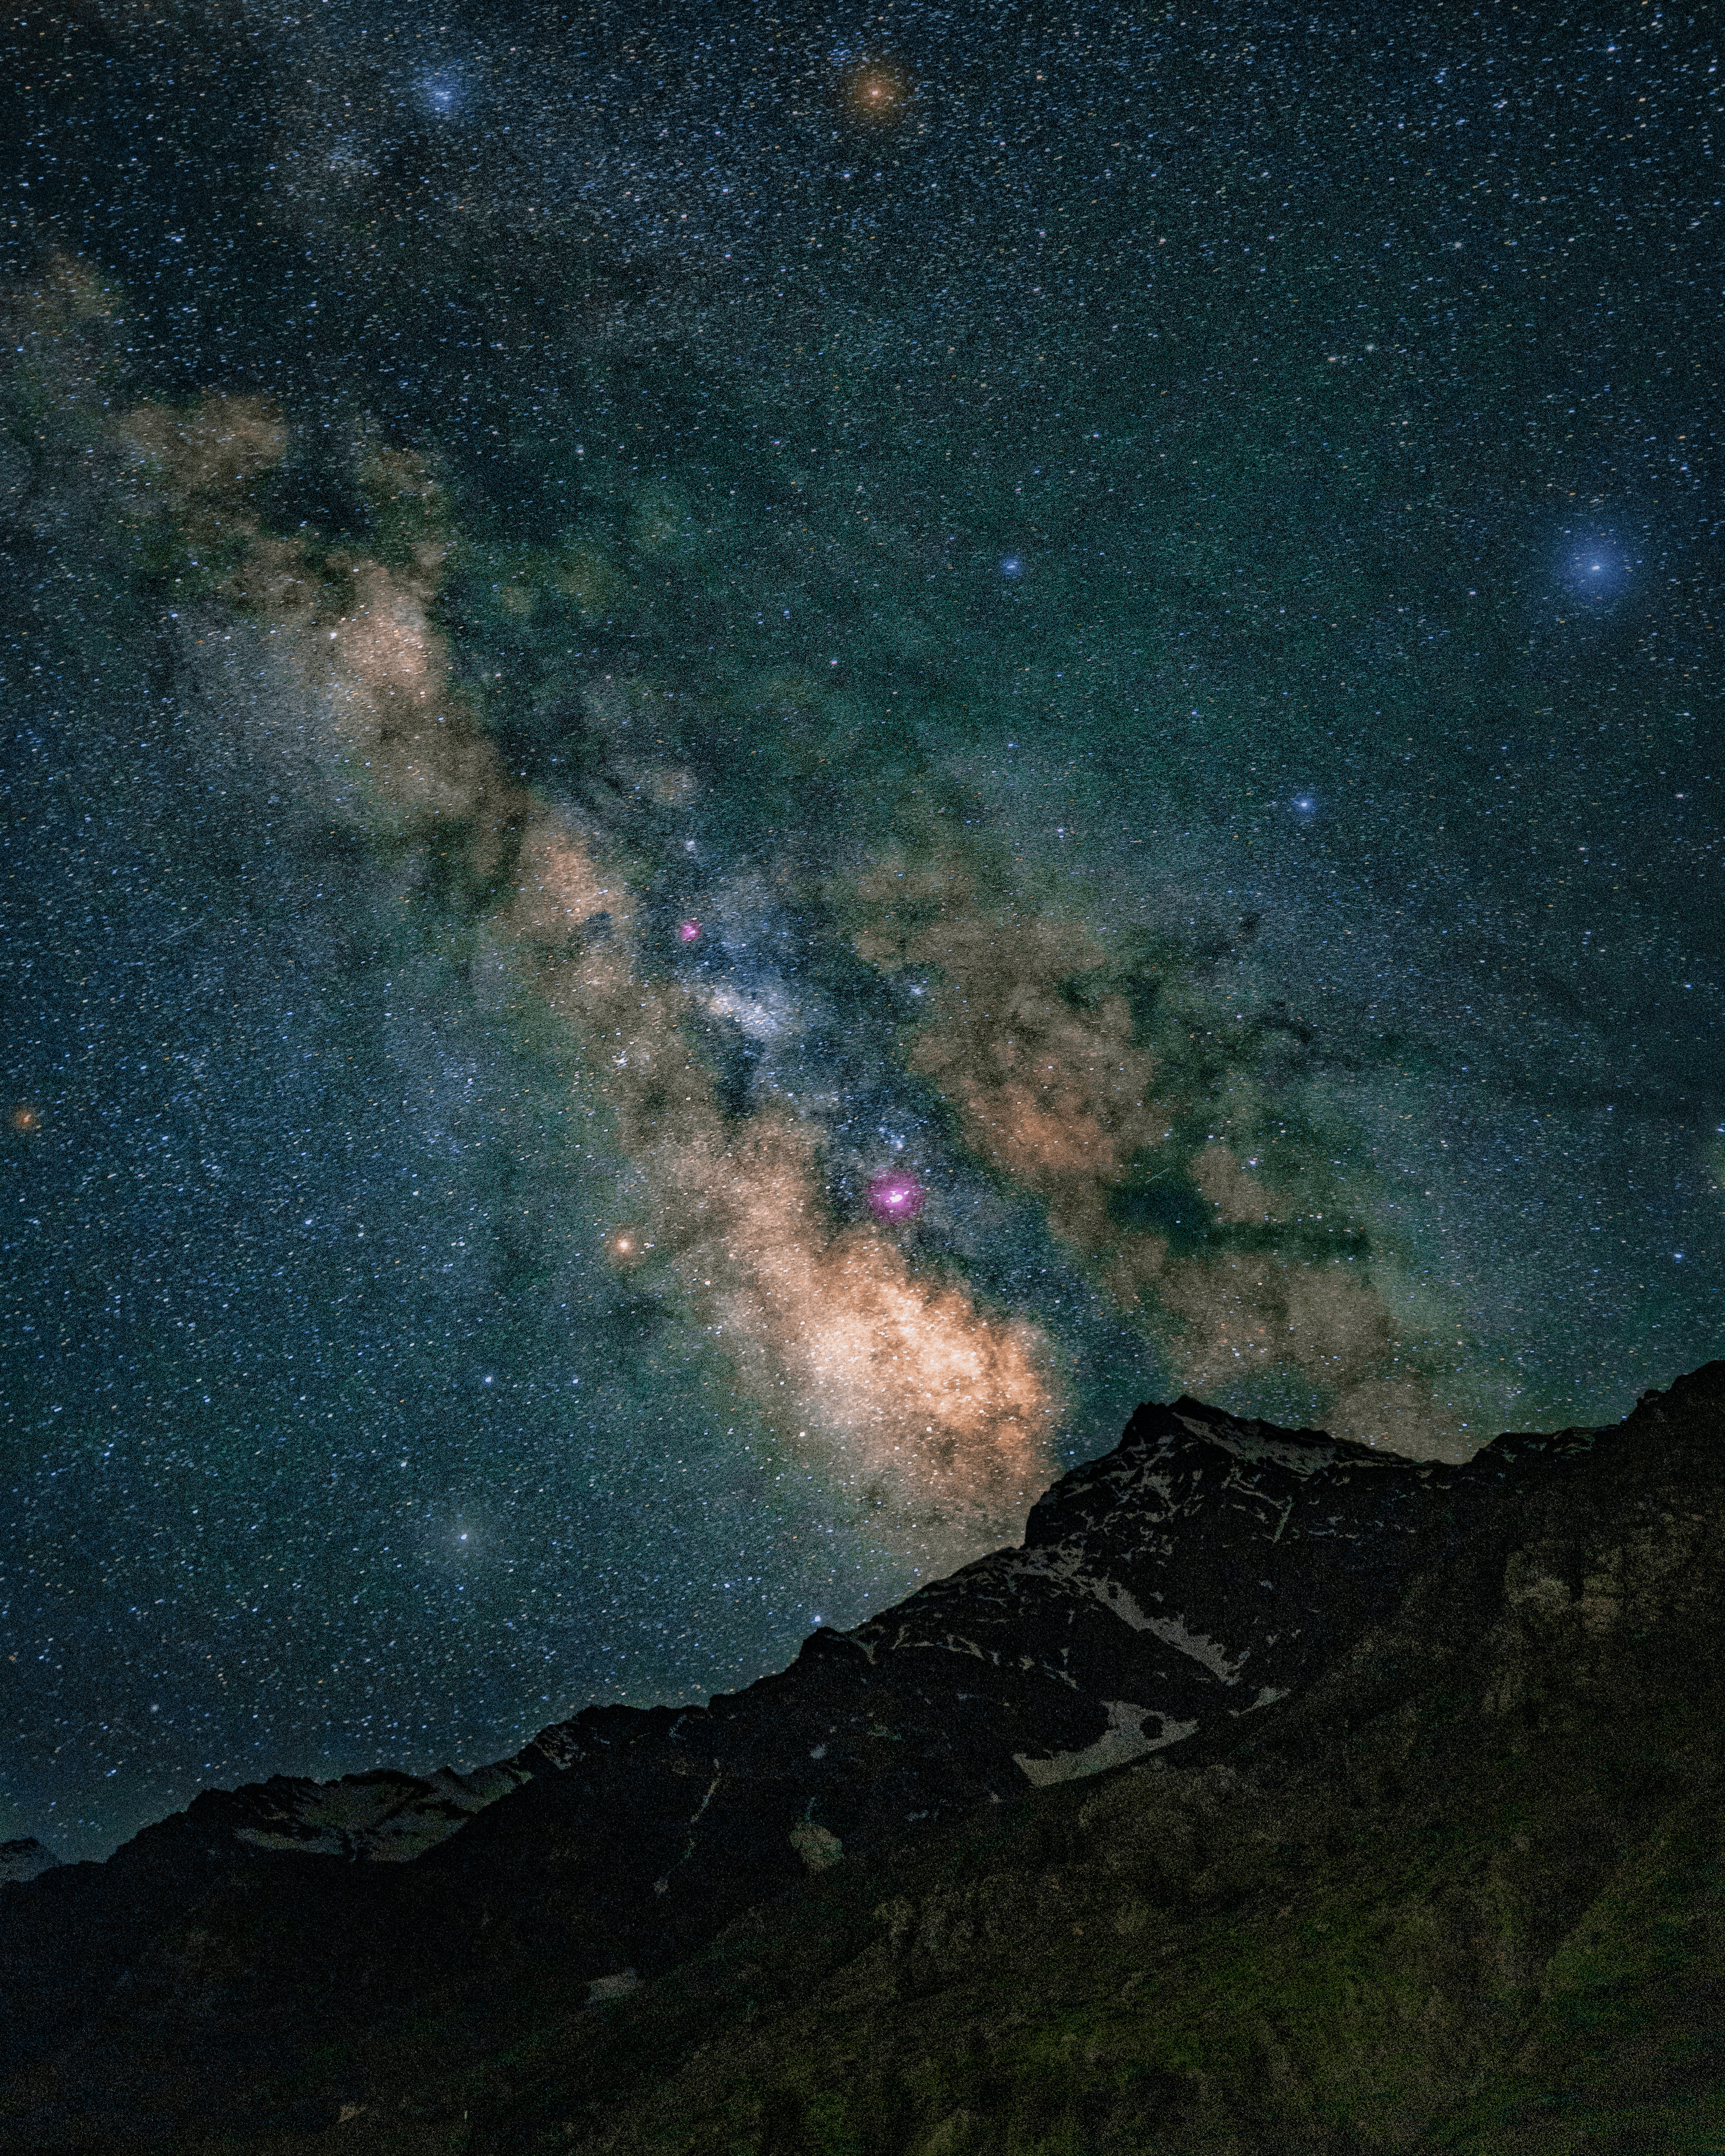 Crown over head - Milkyway and Mountain